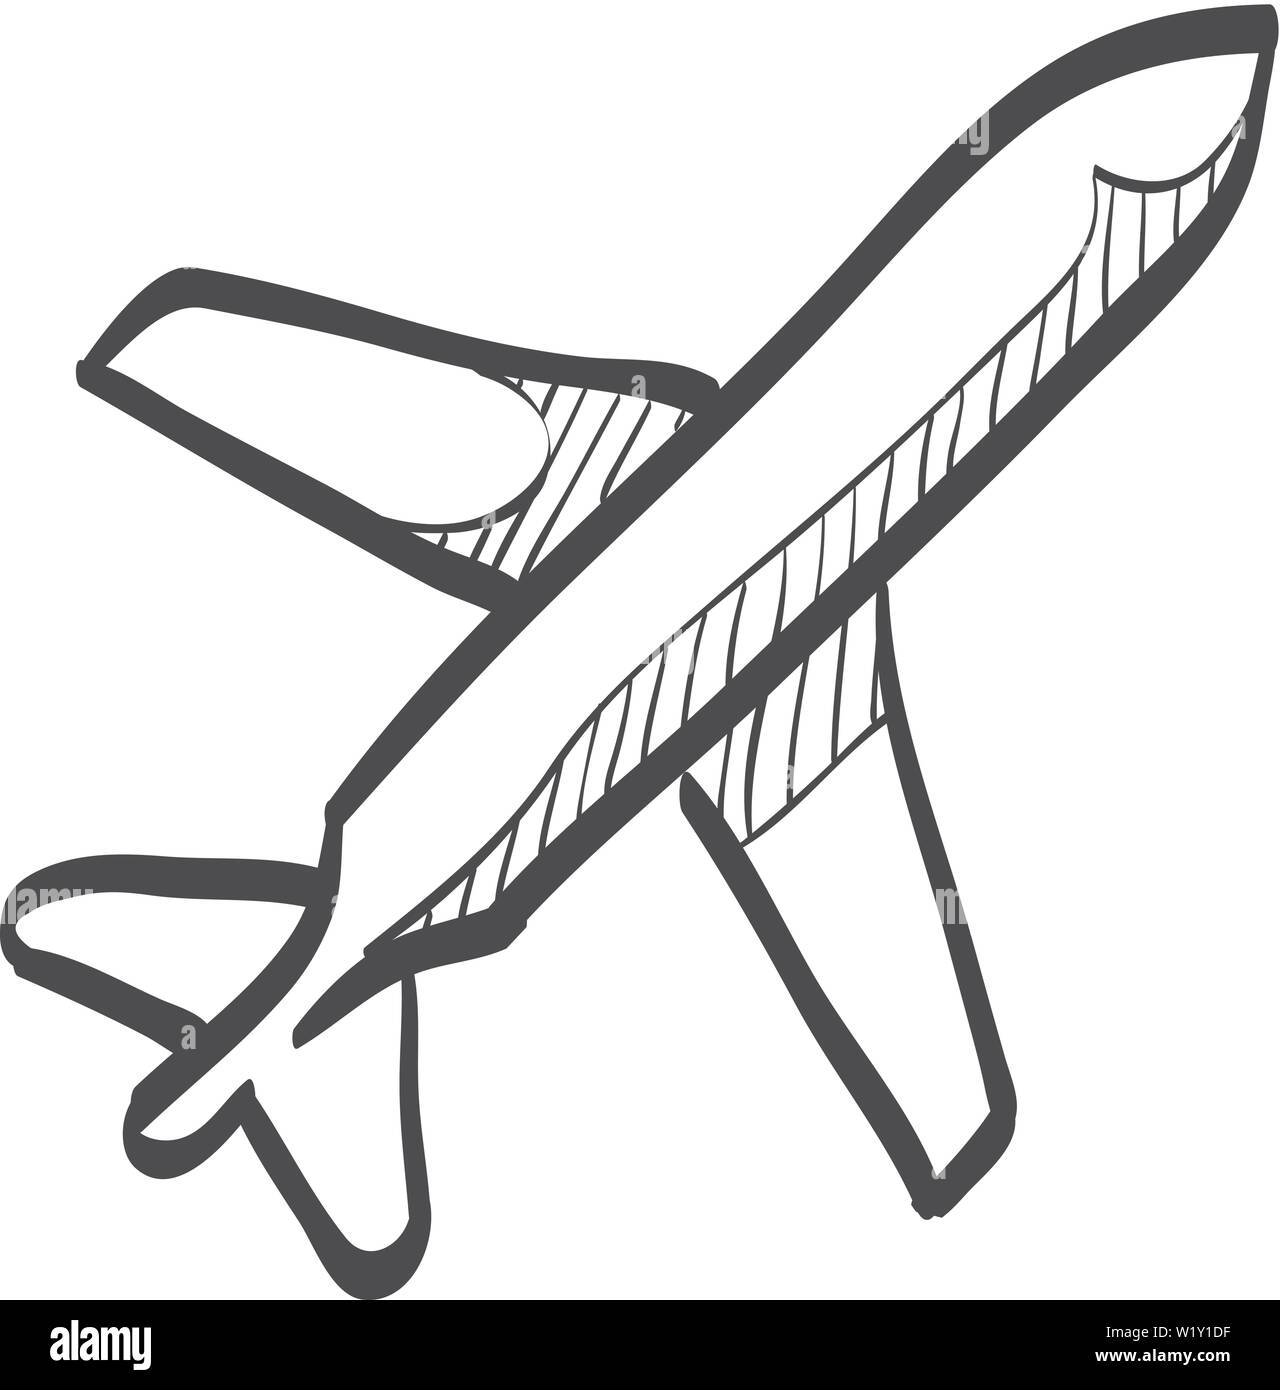 Airplane icon in doodle sketch lines. Aviation transportation take-off travel passenger top view Stock Vector